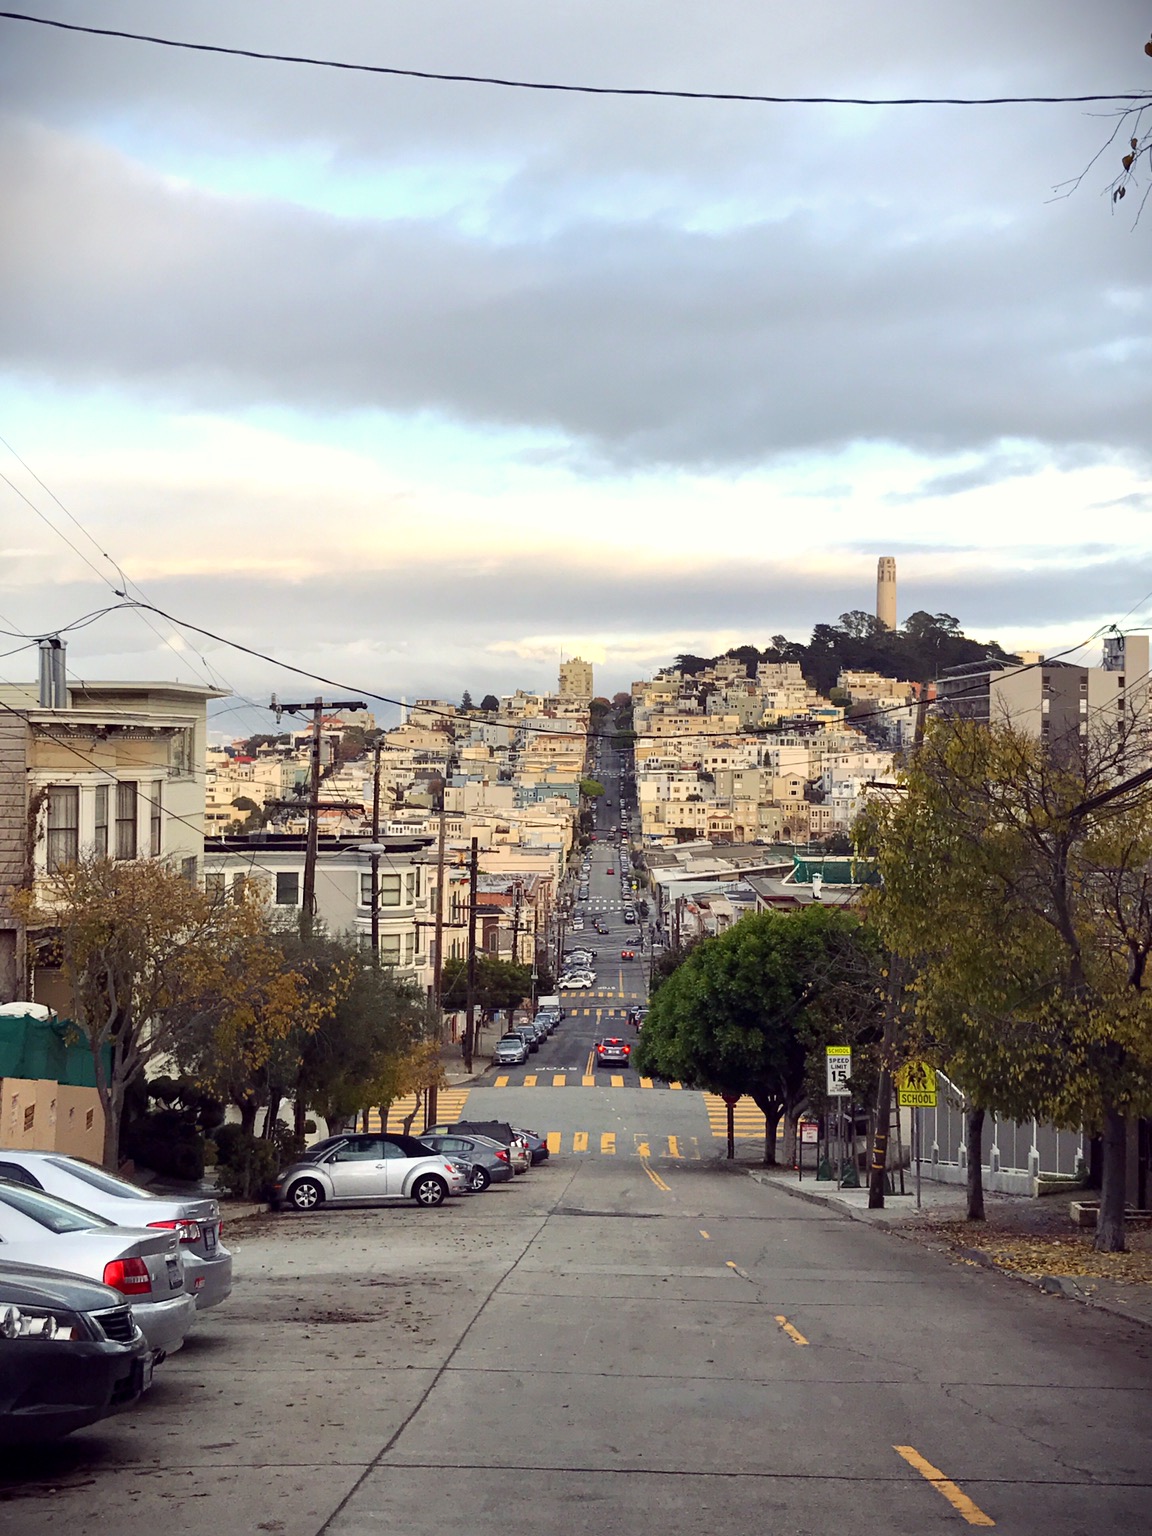  The view from Lombard Street. The streets of San Francisco are typically tilted and steep like this. 